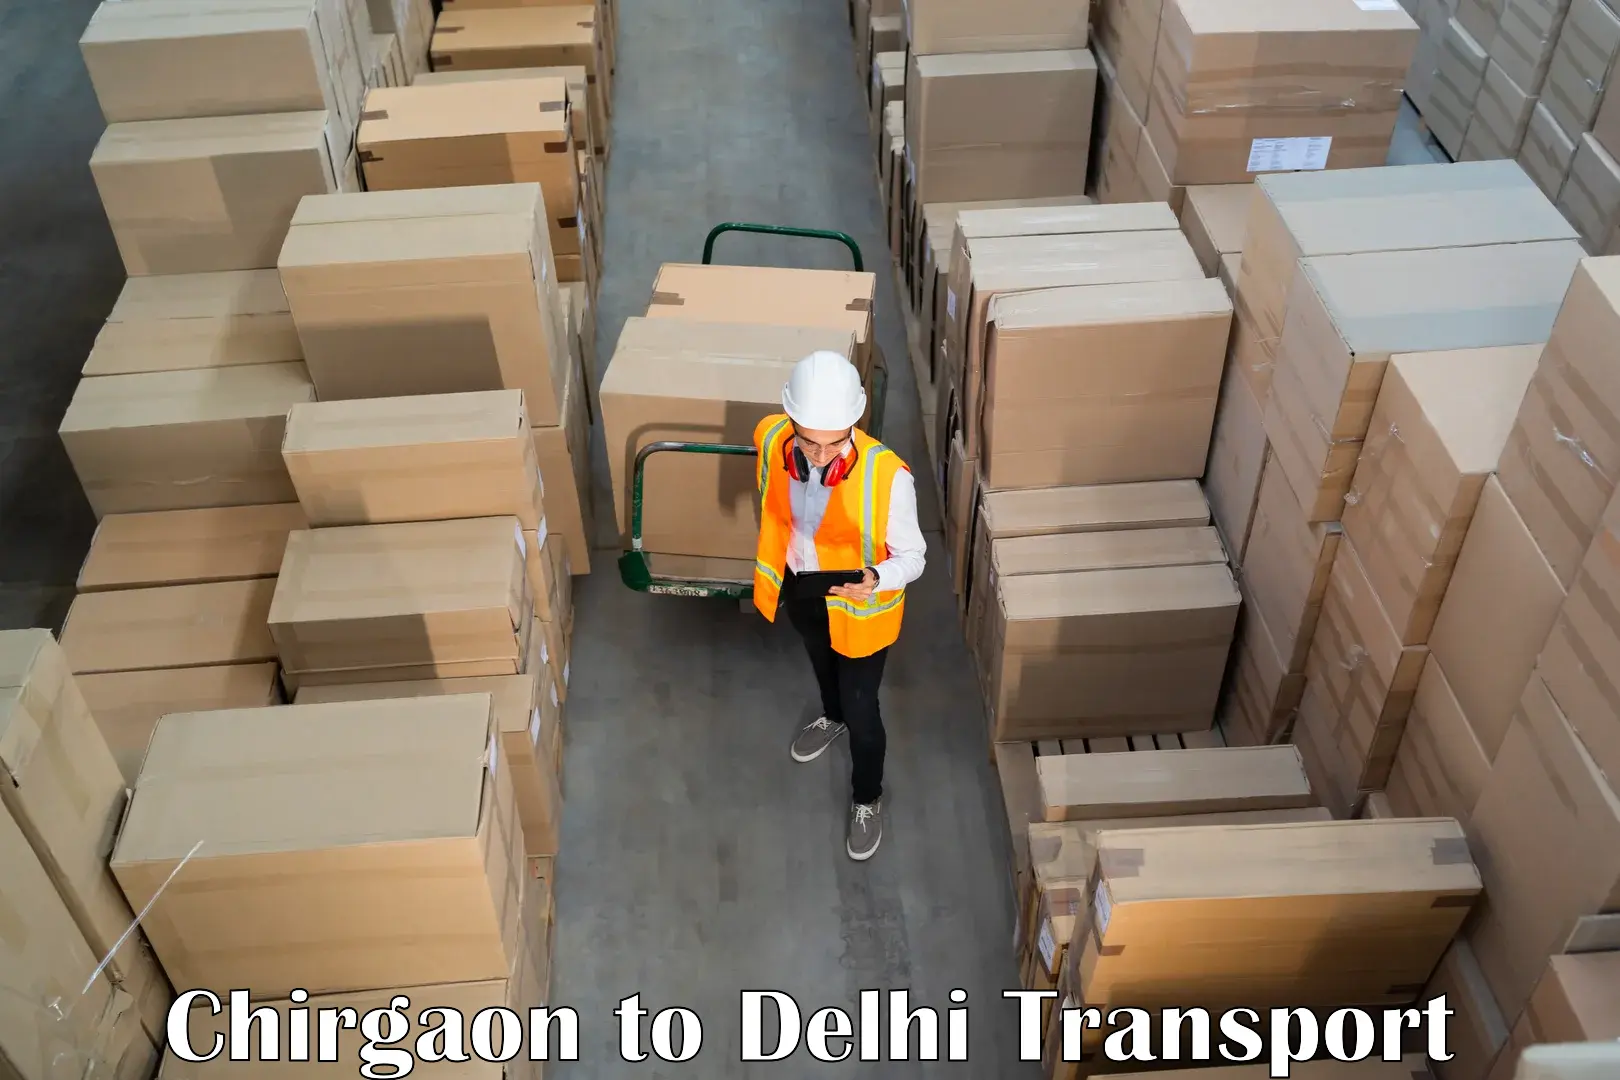 Truck transport companies in India Chirgaon to NCR